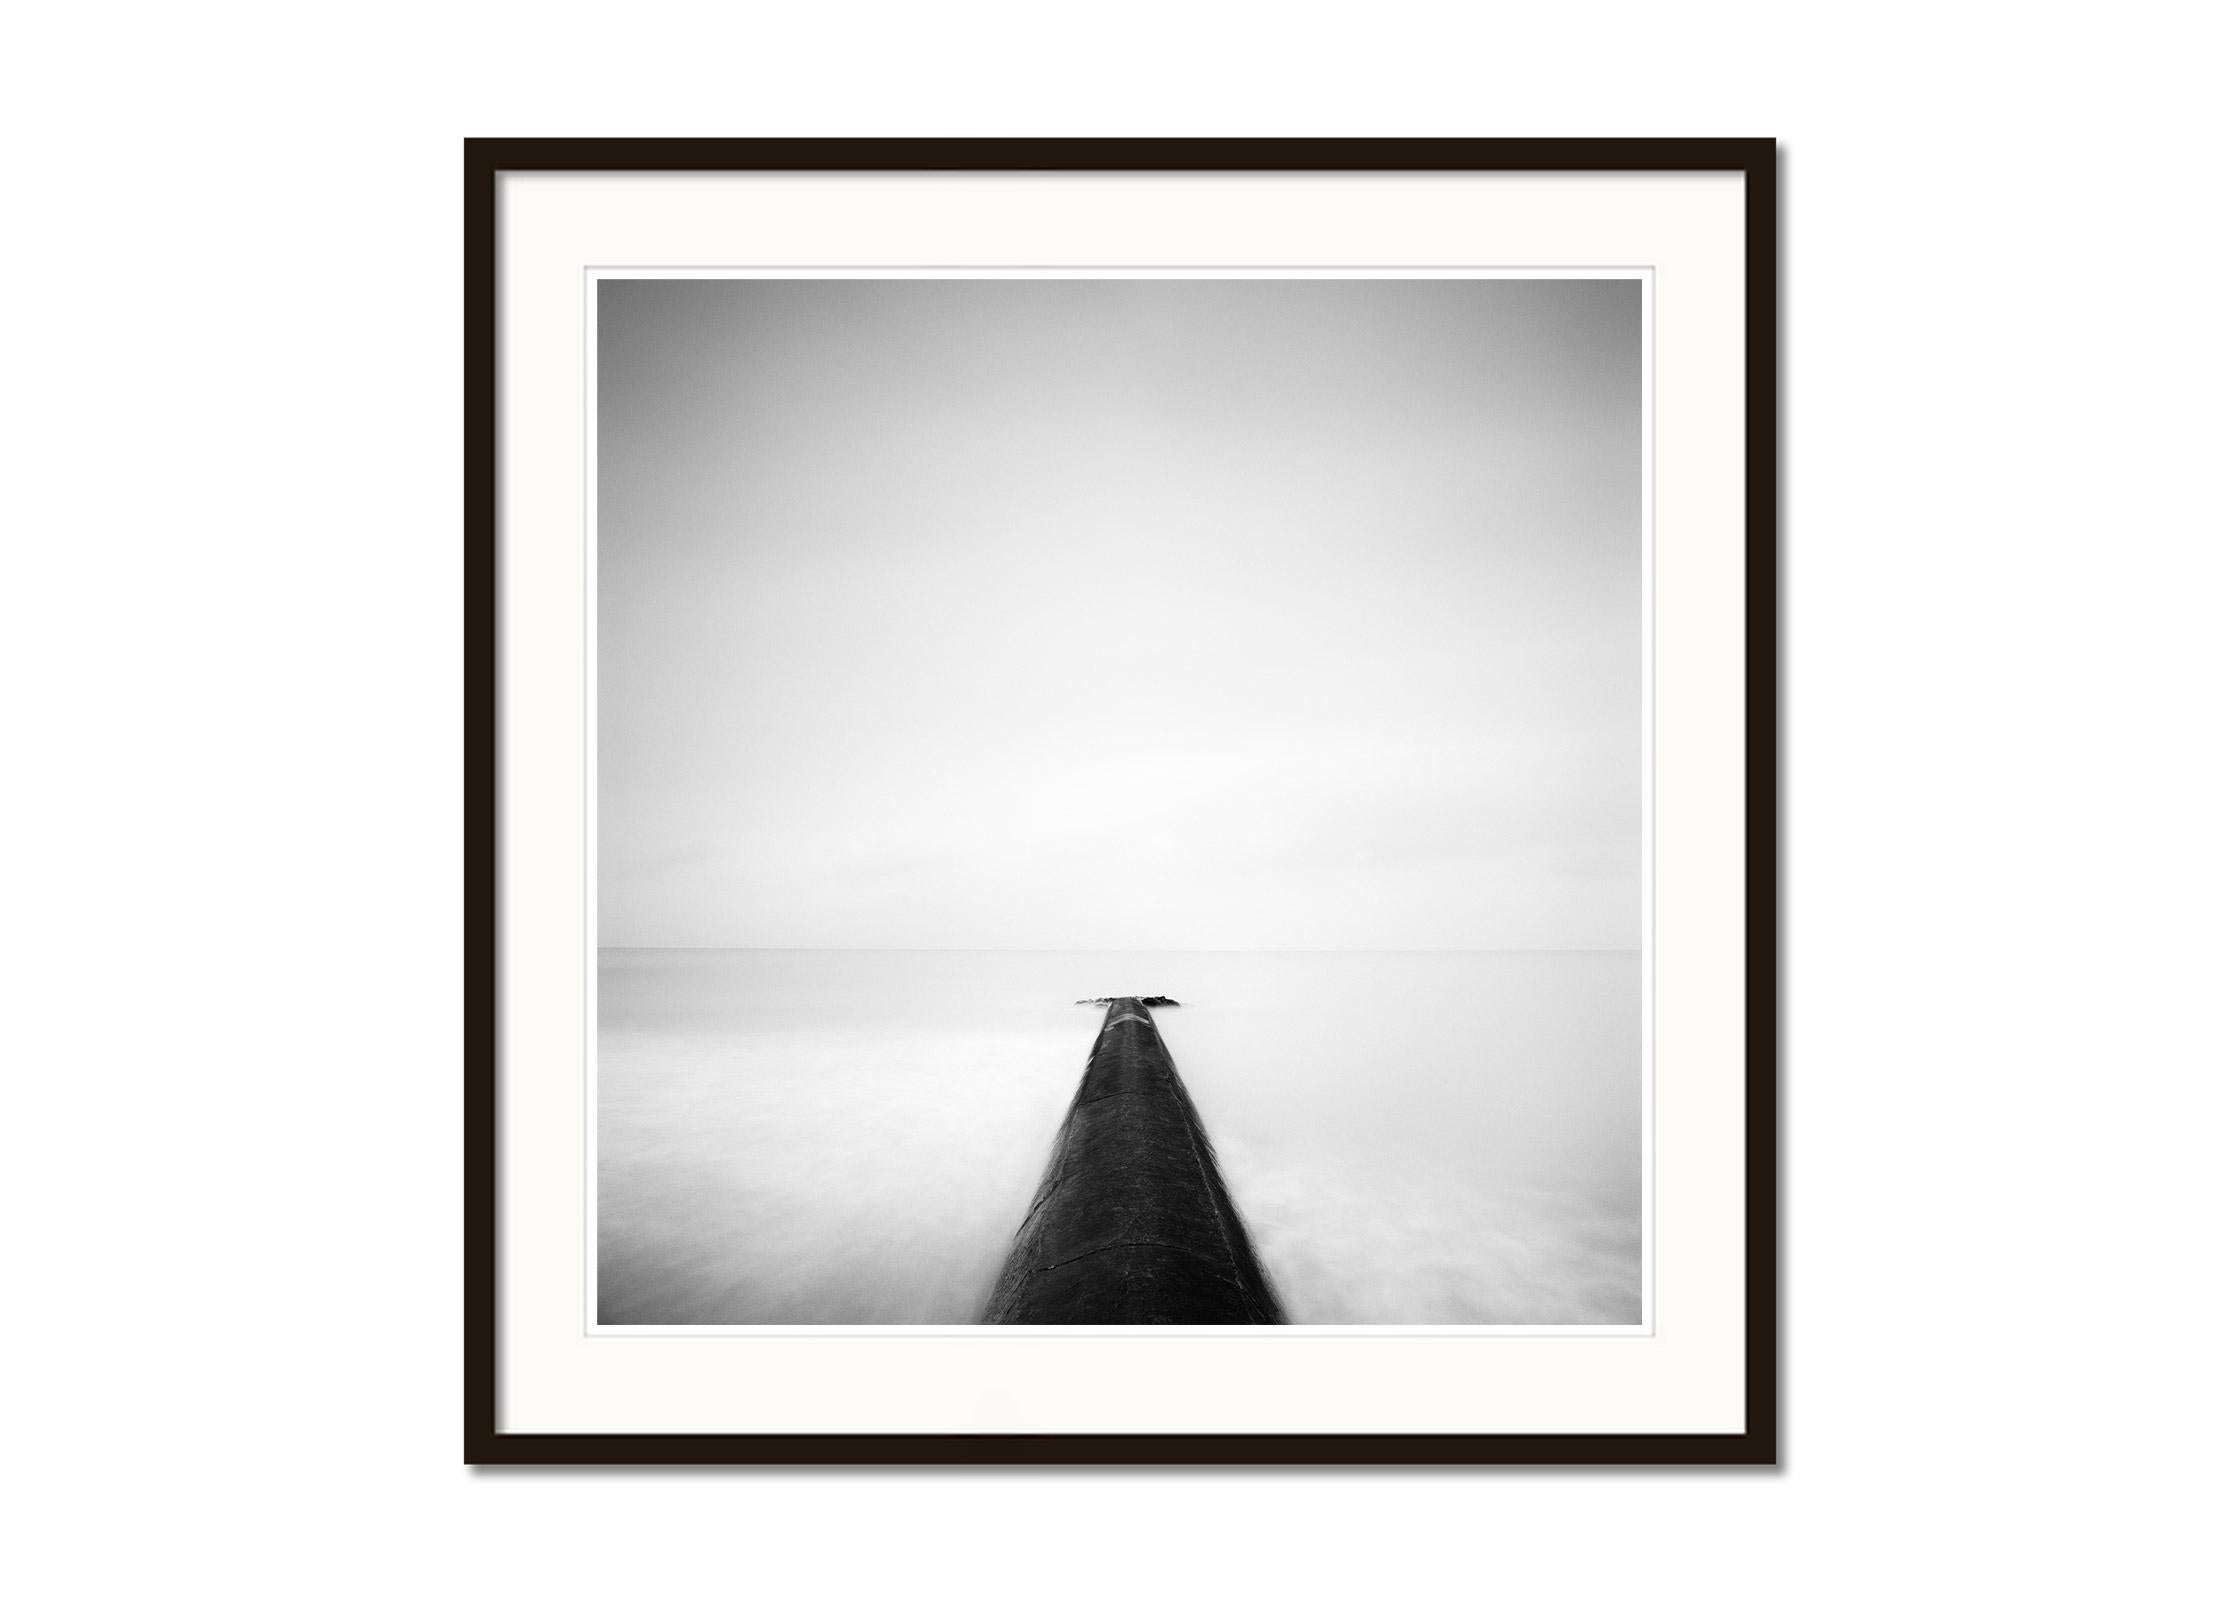 Straight on, Pier, Ozean, Normandie, France, black white photography, landscape - Gray Landscape Photograph by Gerald Berghammer